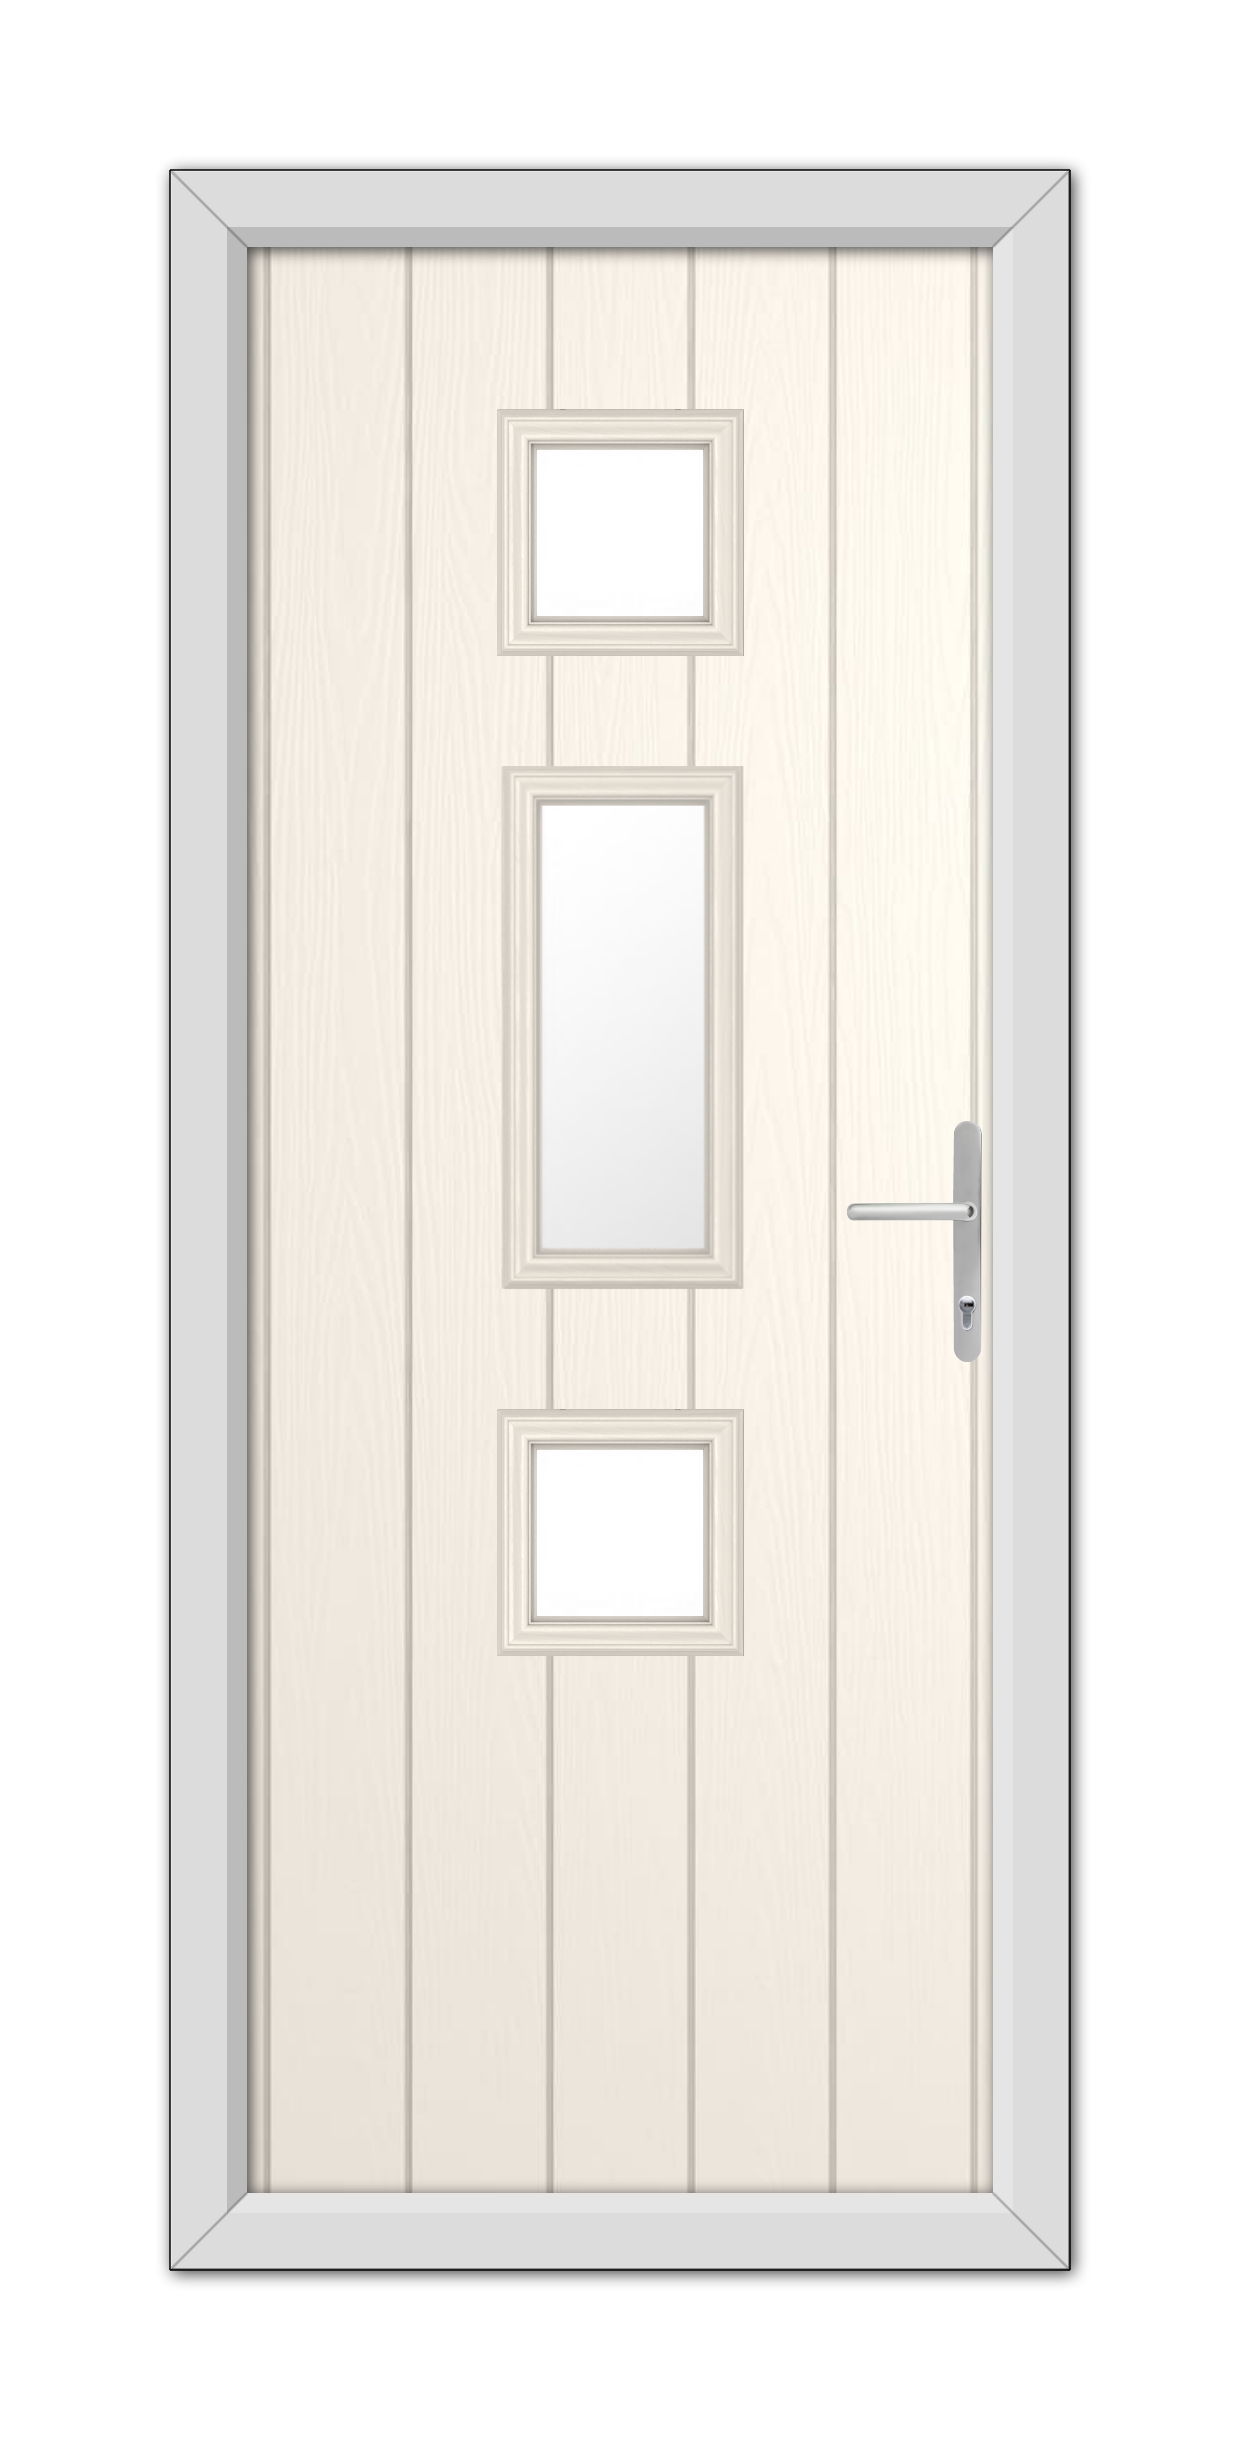 A White Foil York Composite Door 48mm Timber Core with three vertical glass panels and a silver handle, set within a gray frame.